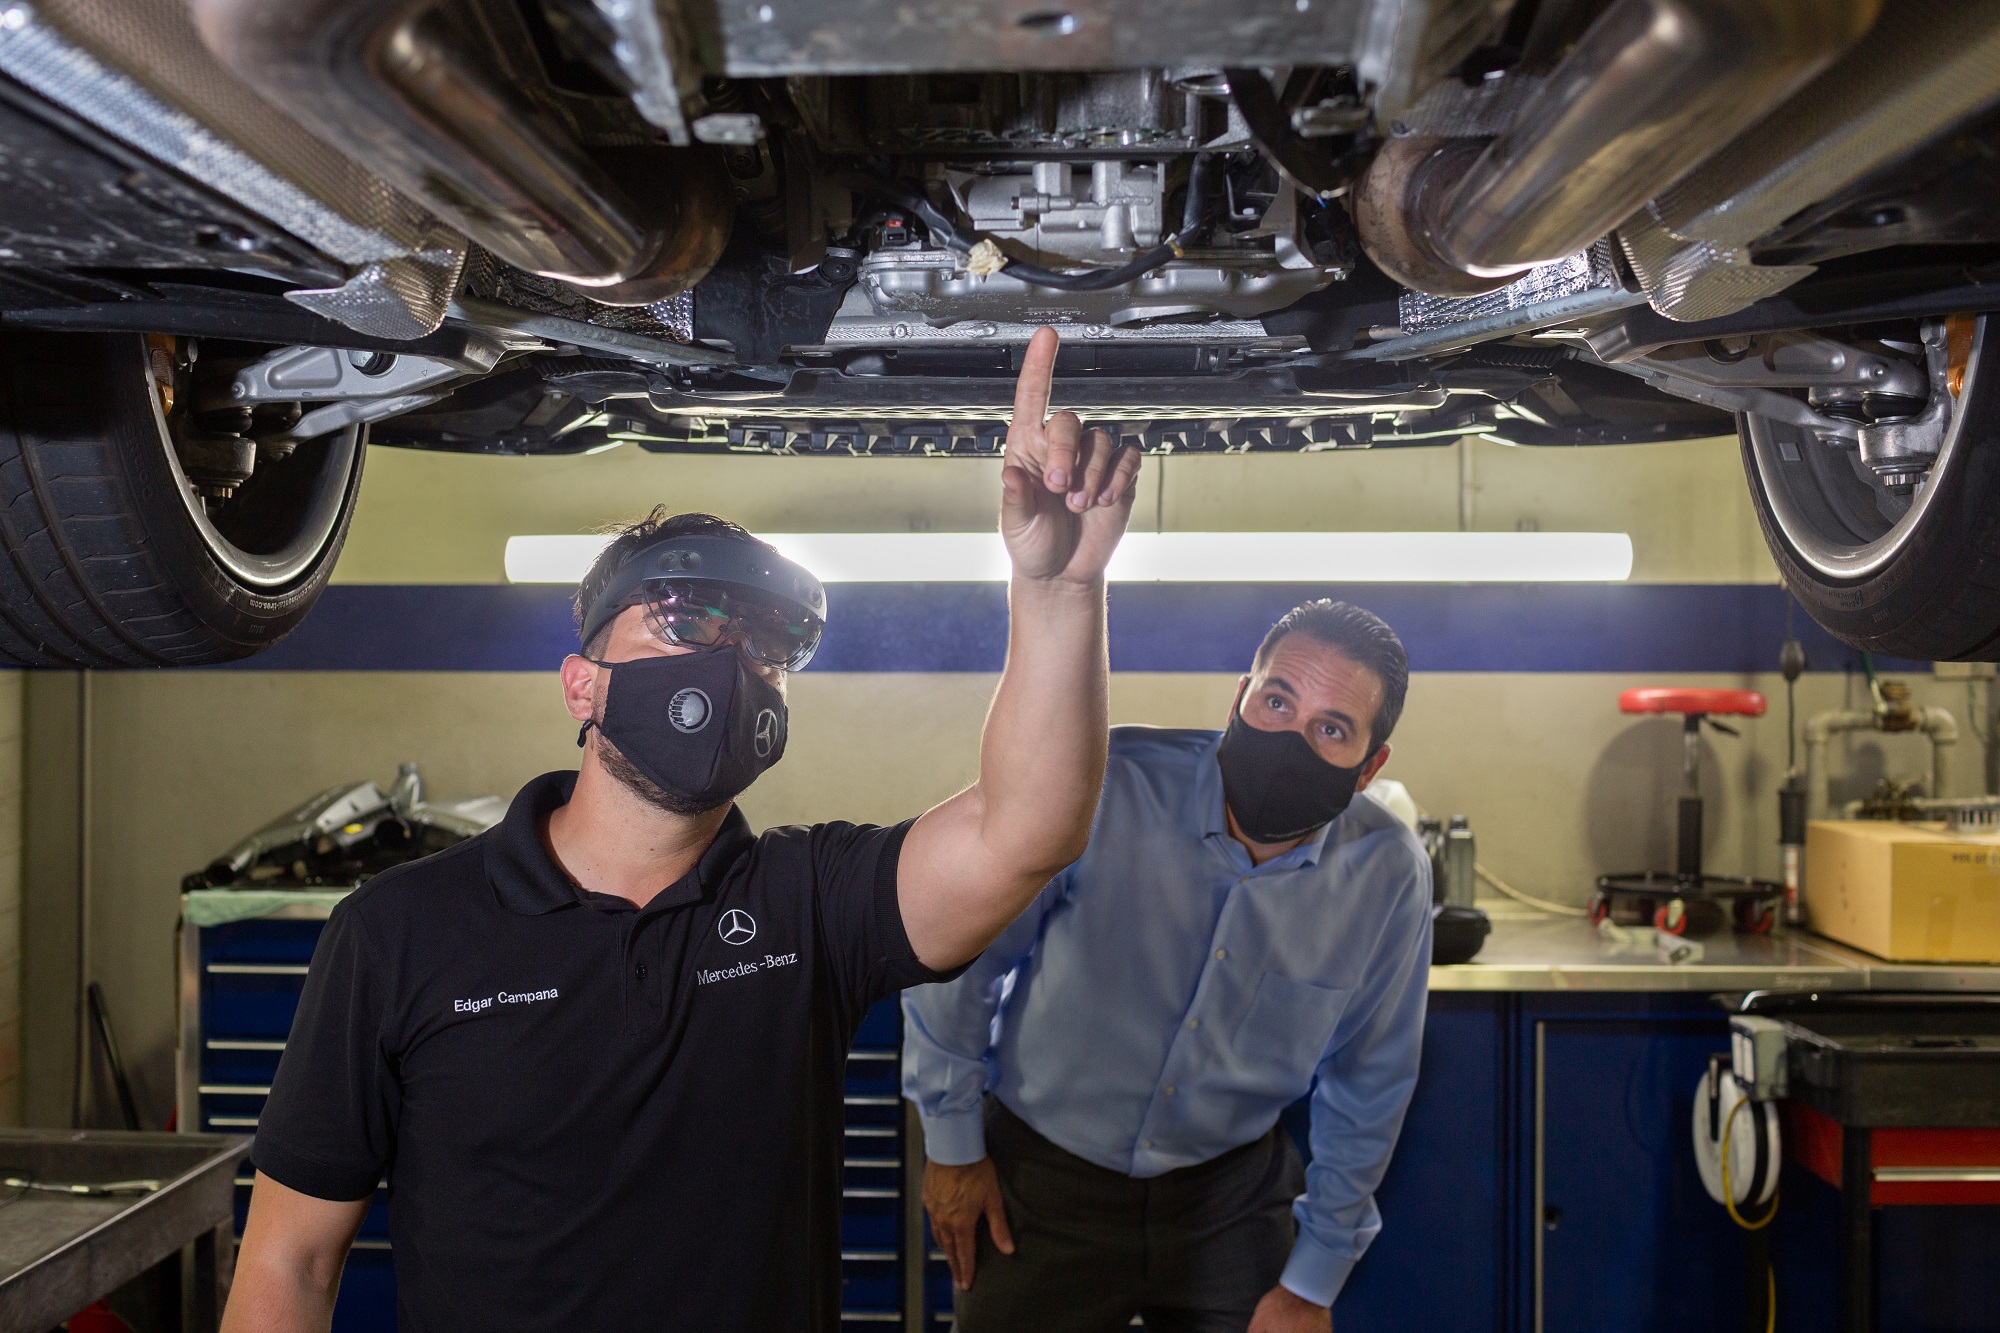 Mercedes-Benz USA technicians view the underside of a vehicle using HoloLens 2 headsets